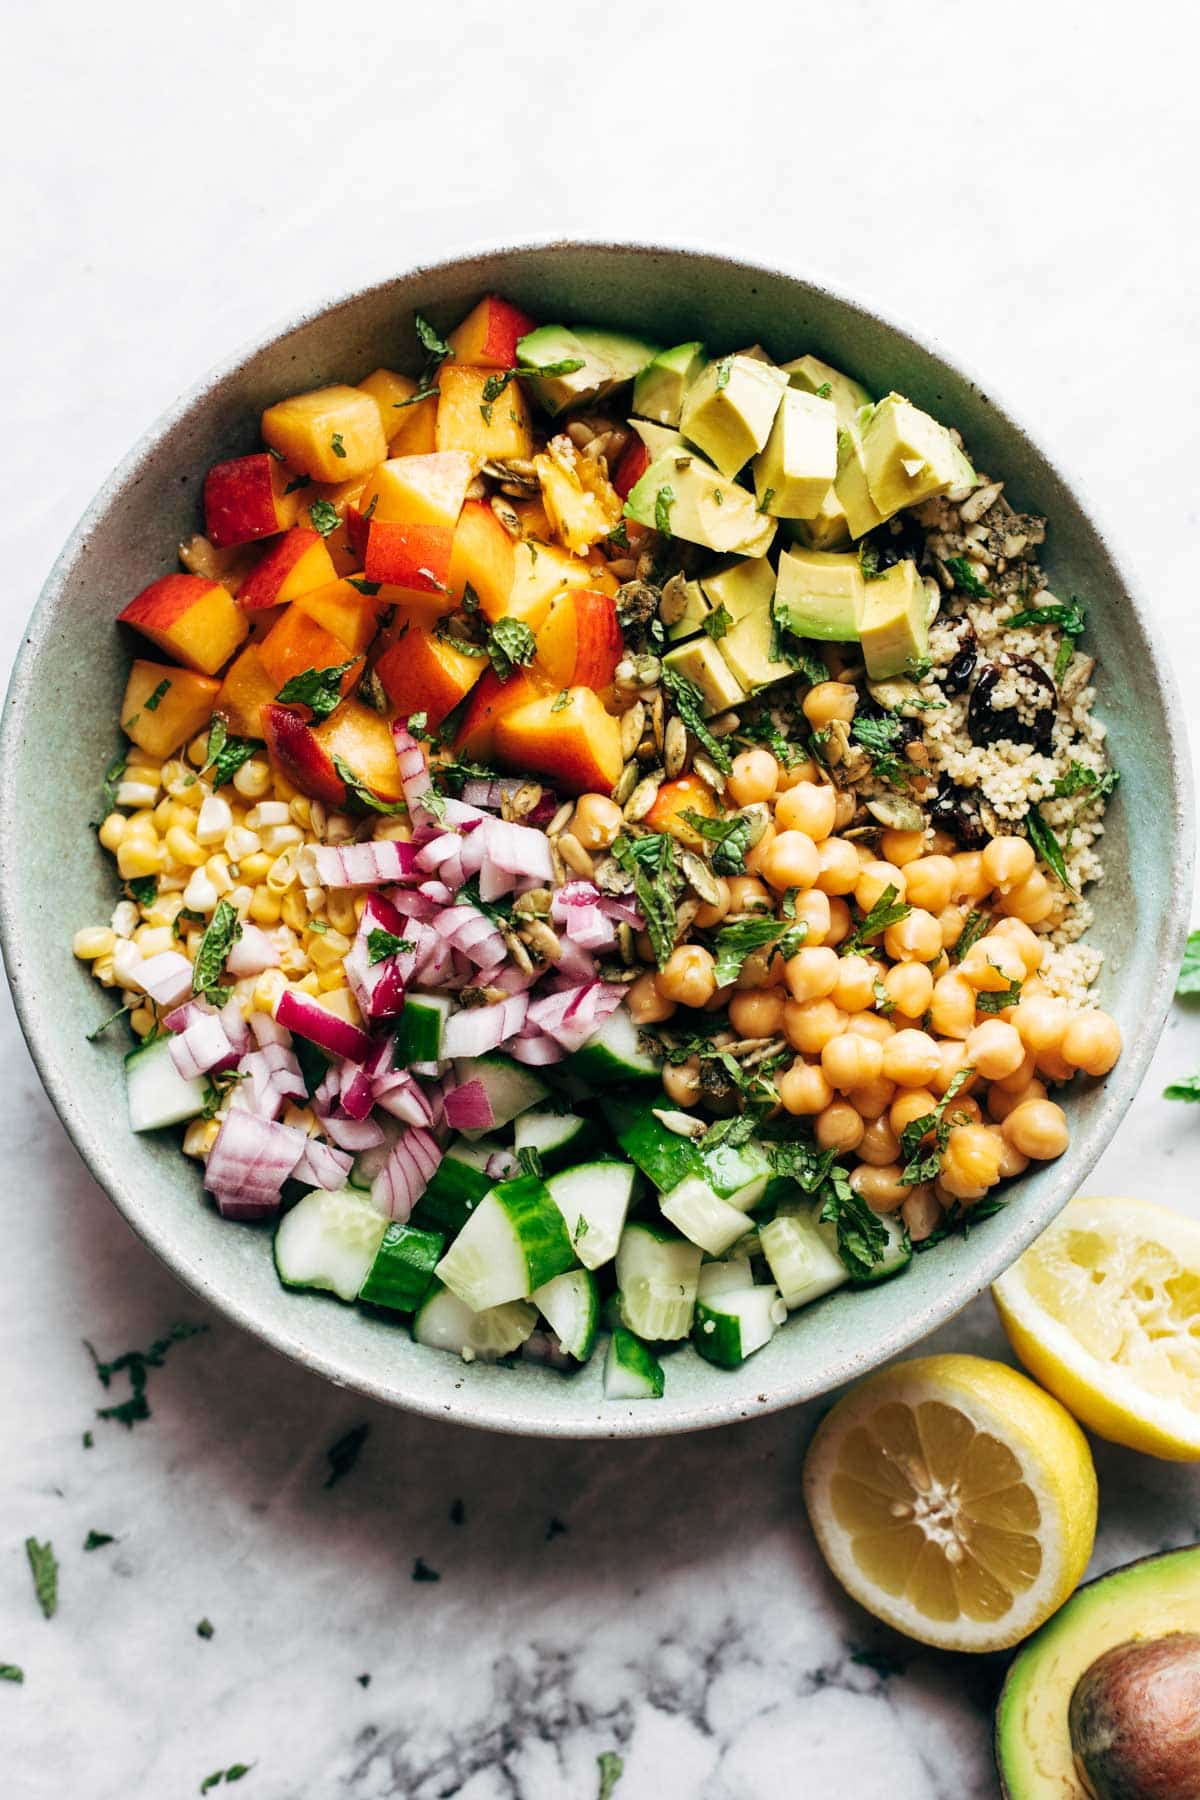 Couscous summer salad in a bowl.